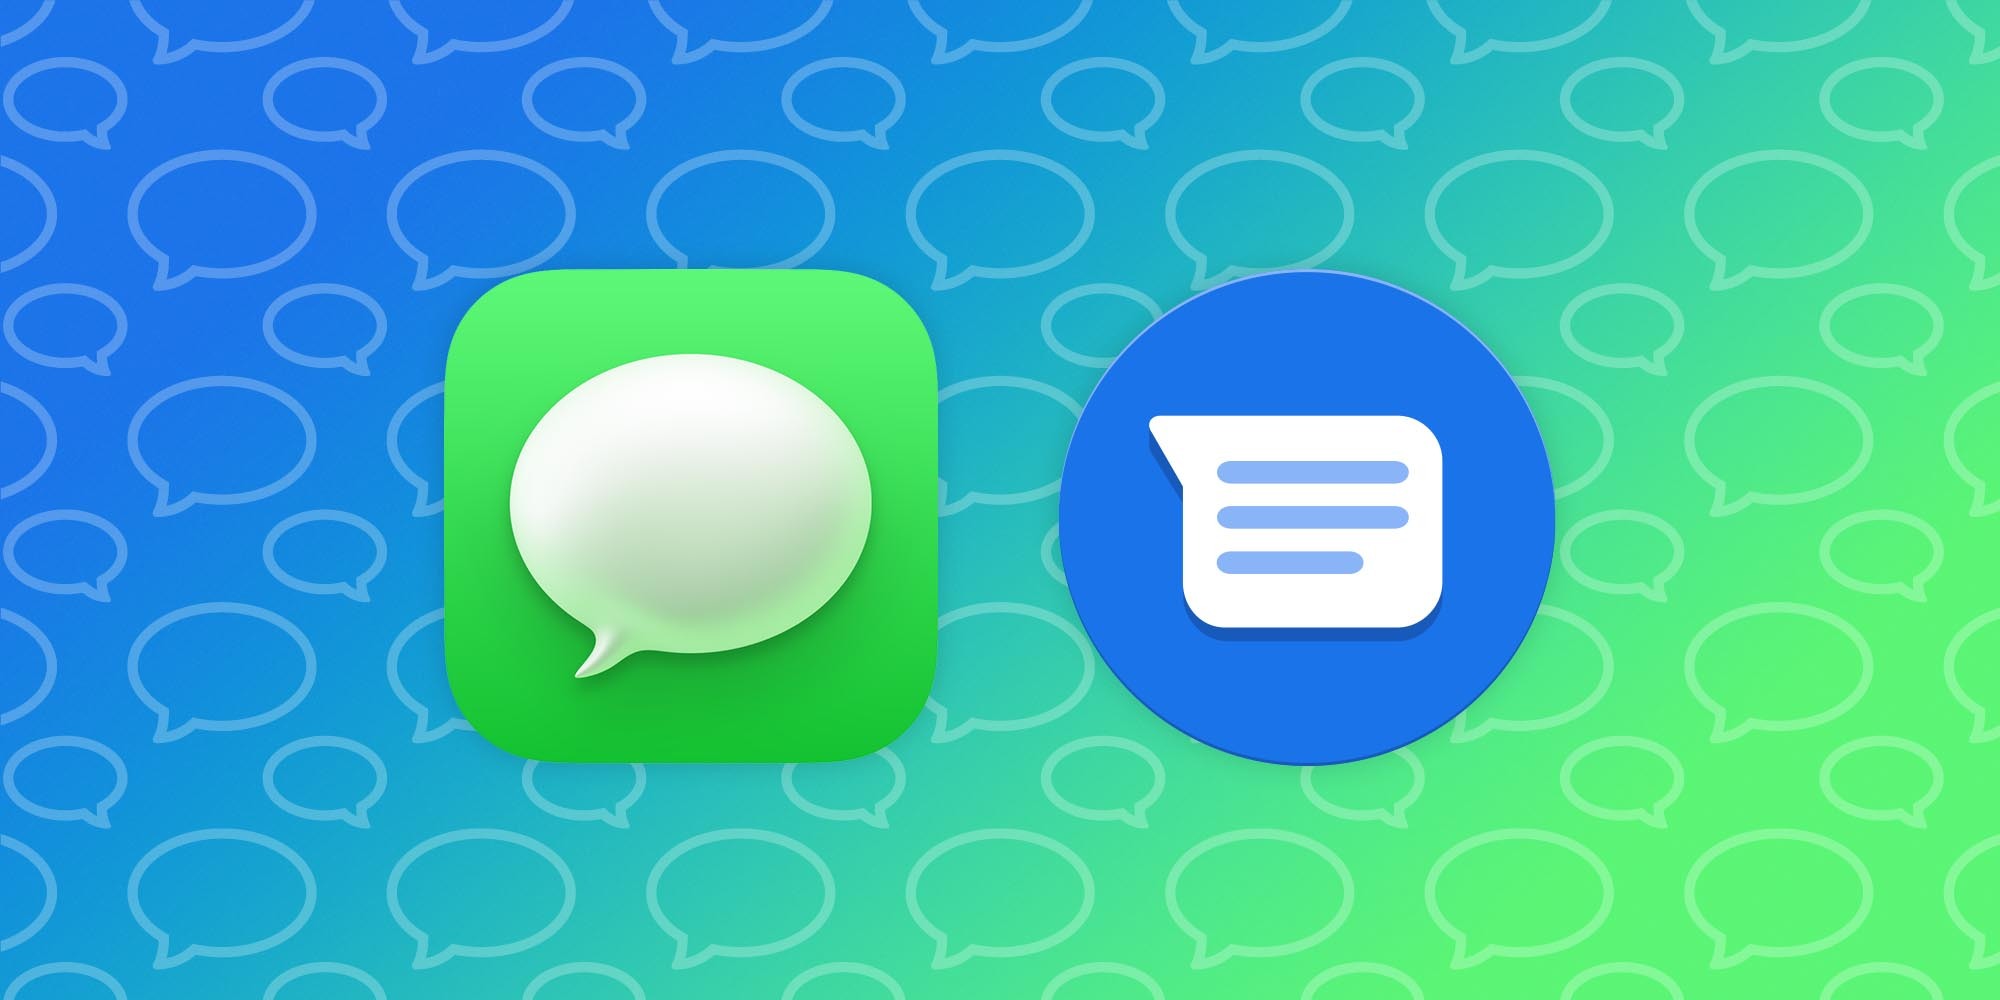 iMessage and RCS.